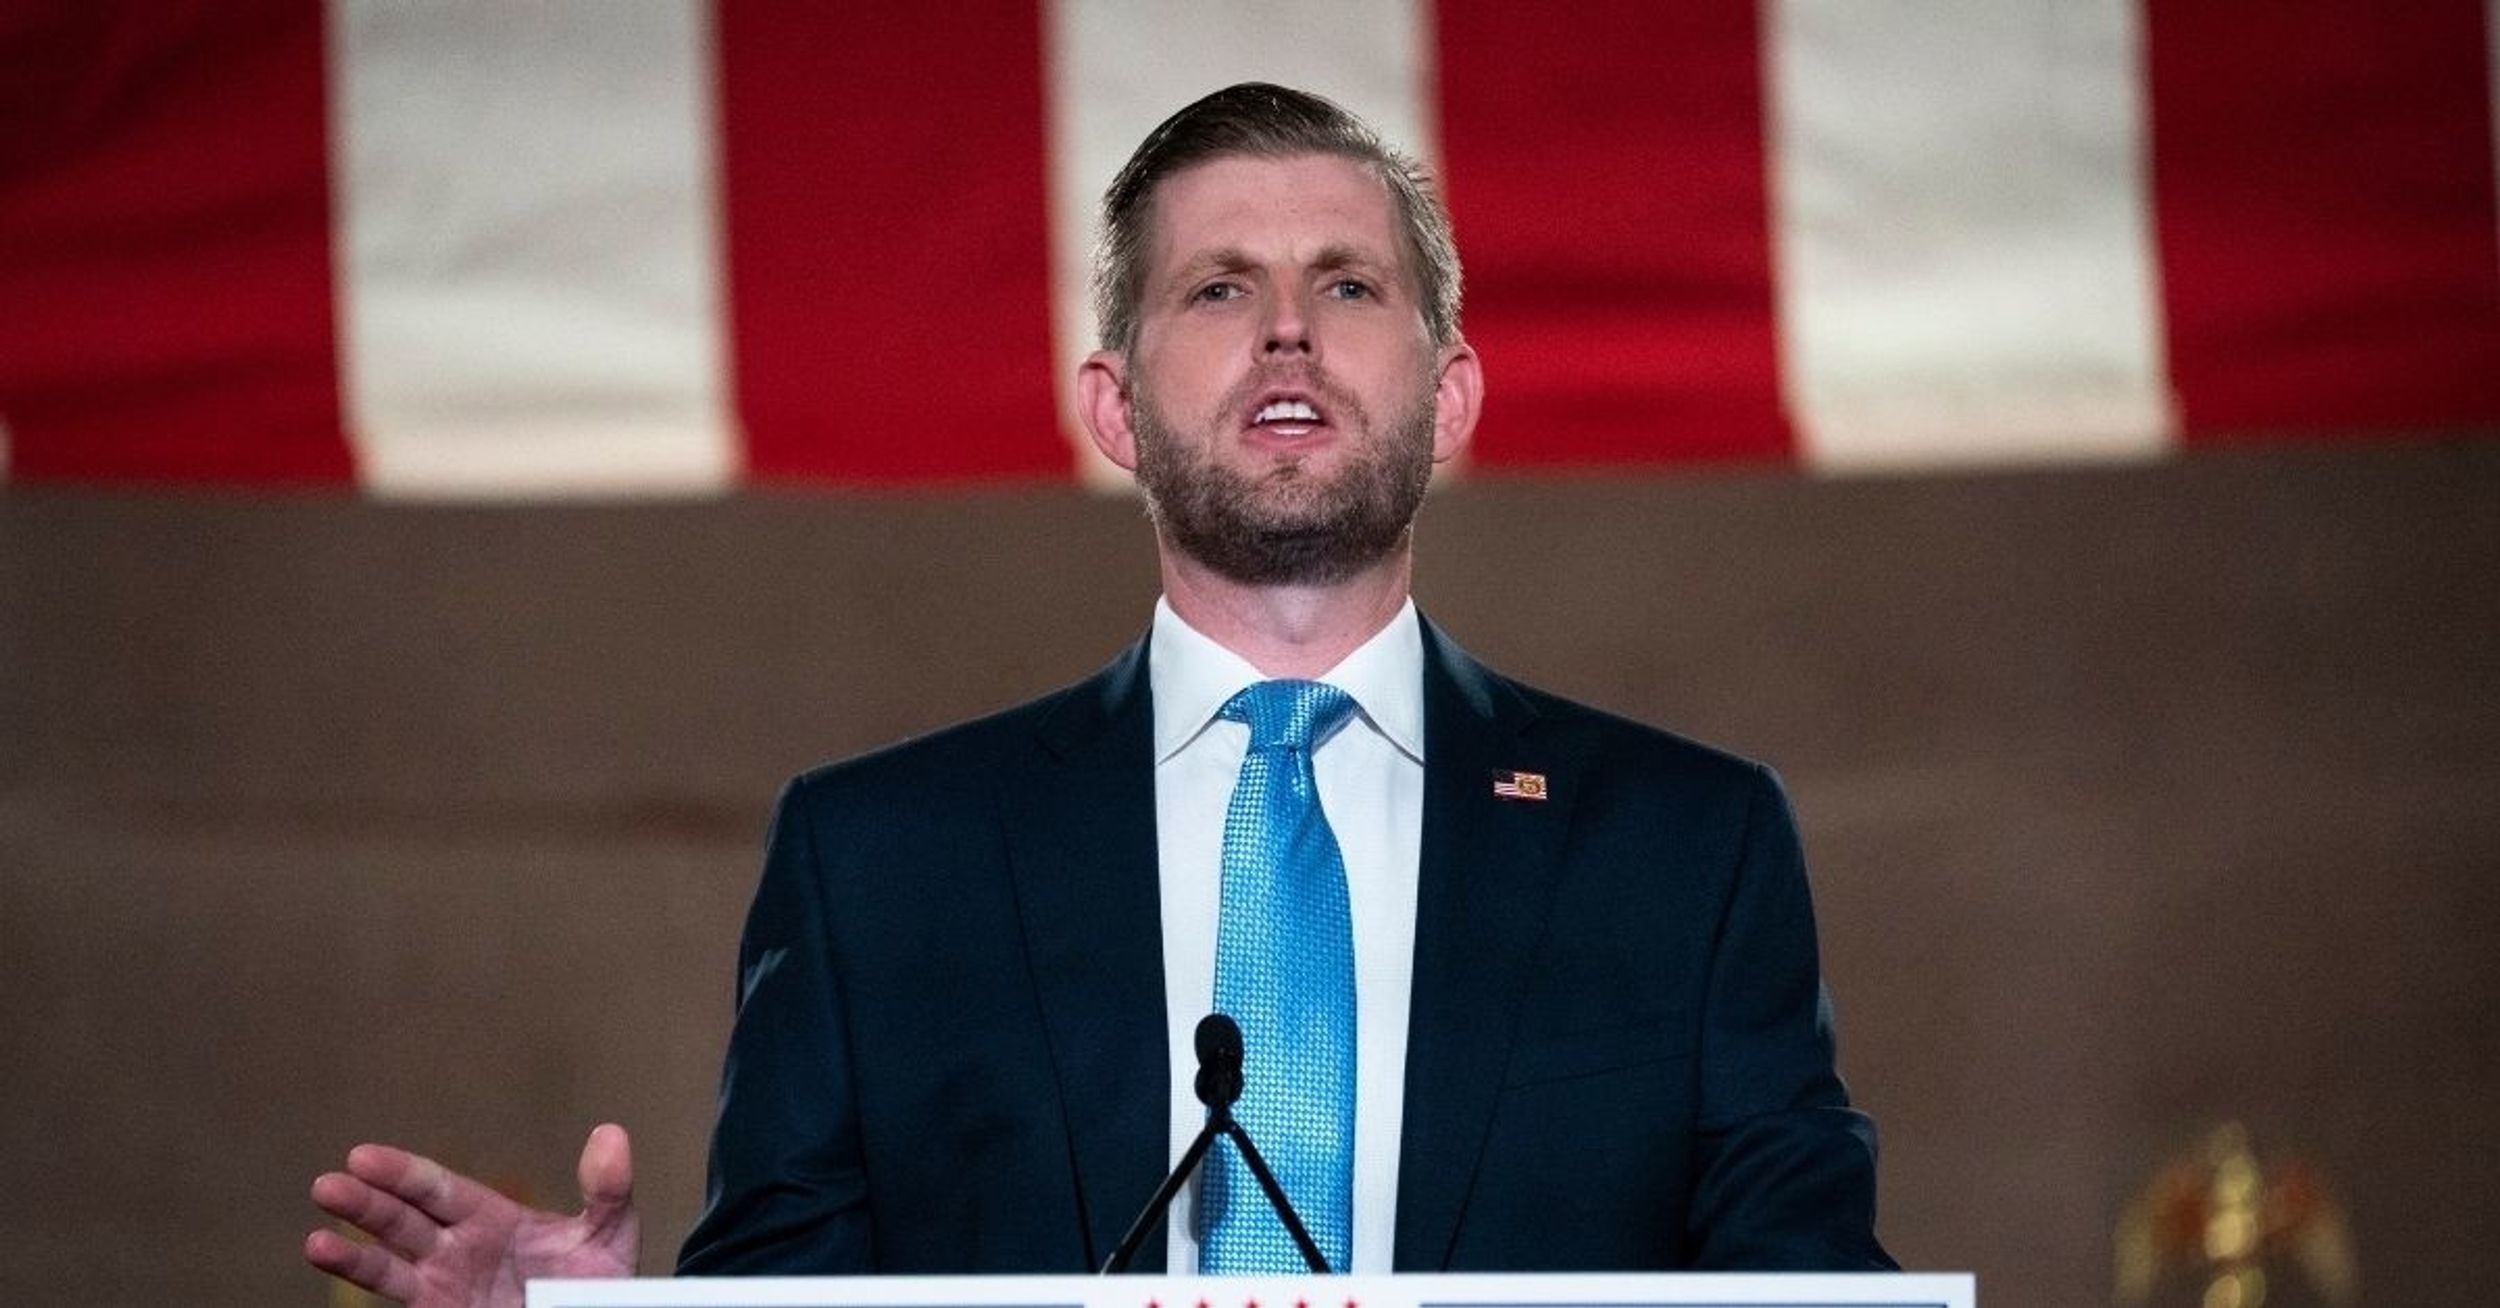 Eric Trump Just Branded Biden A 'Coward' Over Debate That His Father Is Refusing To Attend, And Everyone Is Baffled